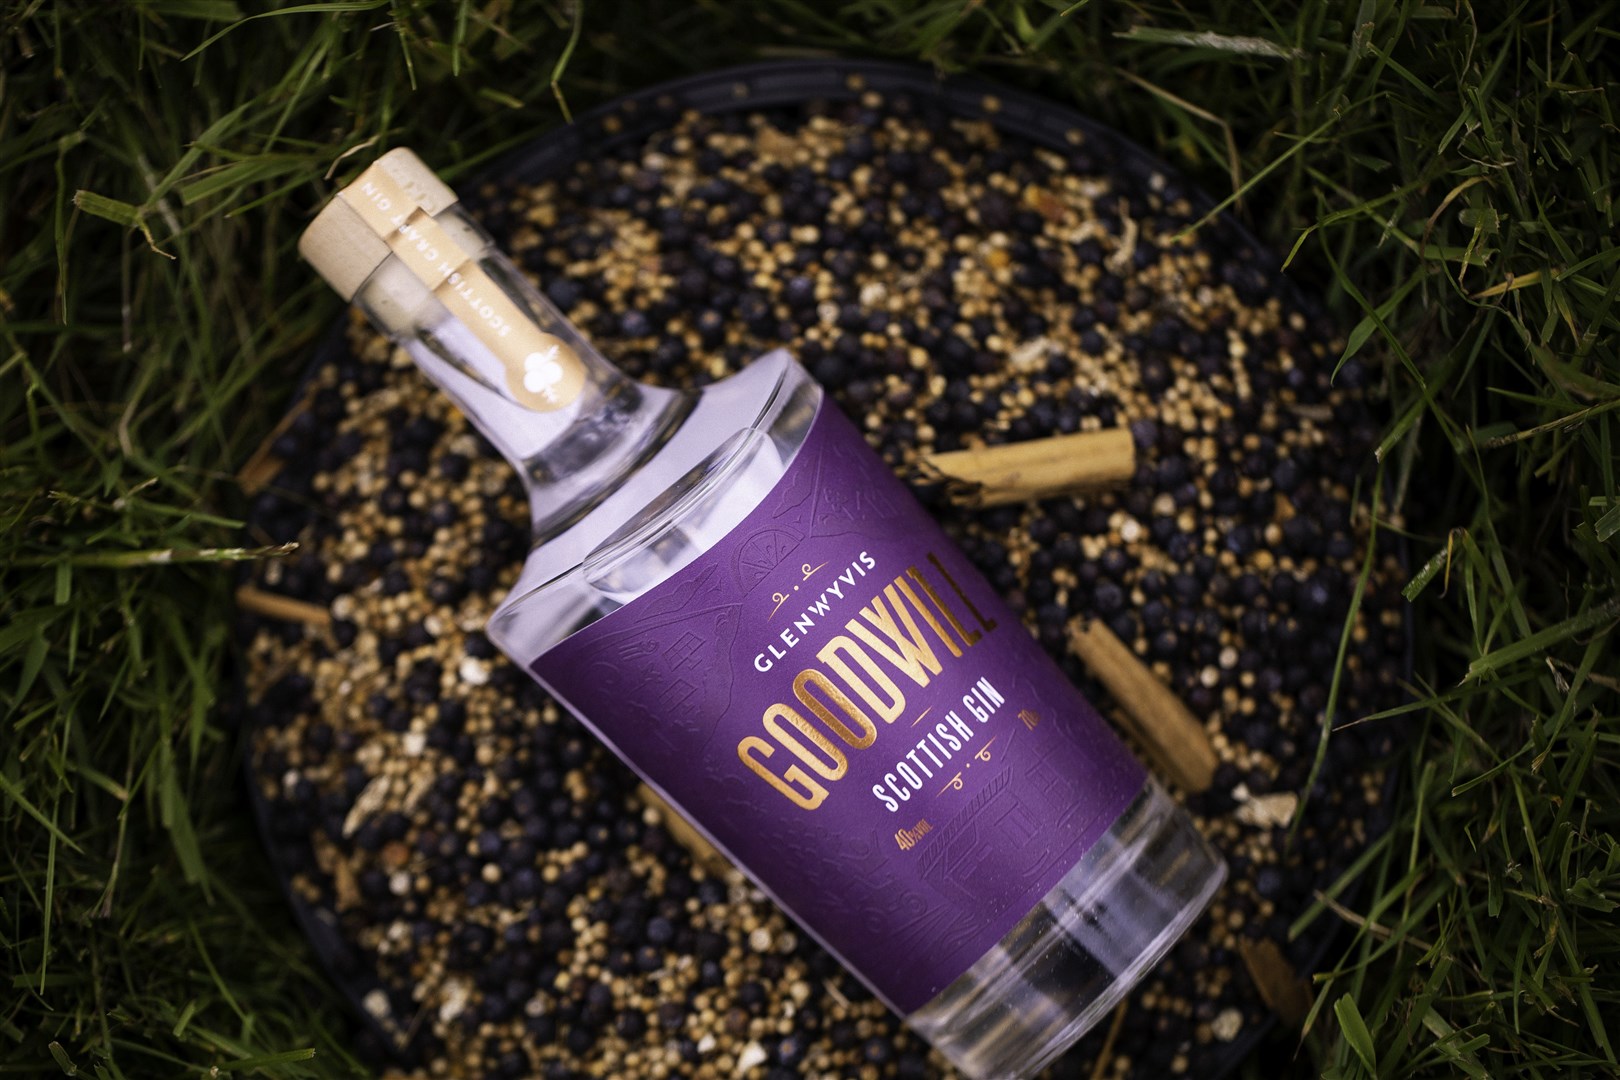 Locally-sourced hawthorne gives GoodWill Gin a local flavour boost.